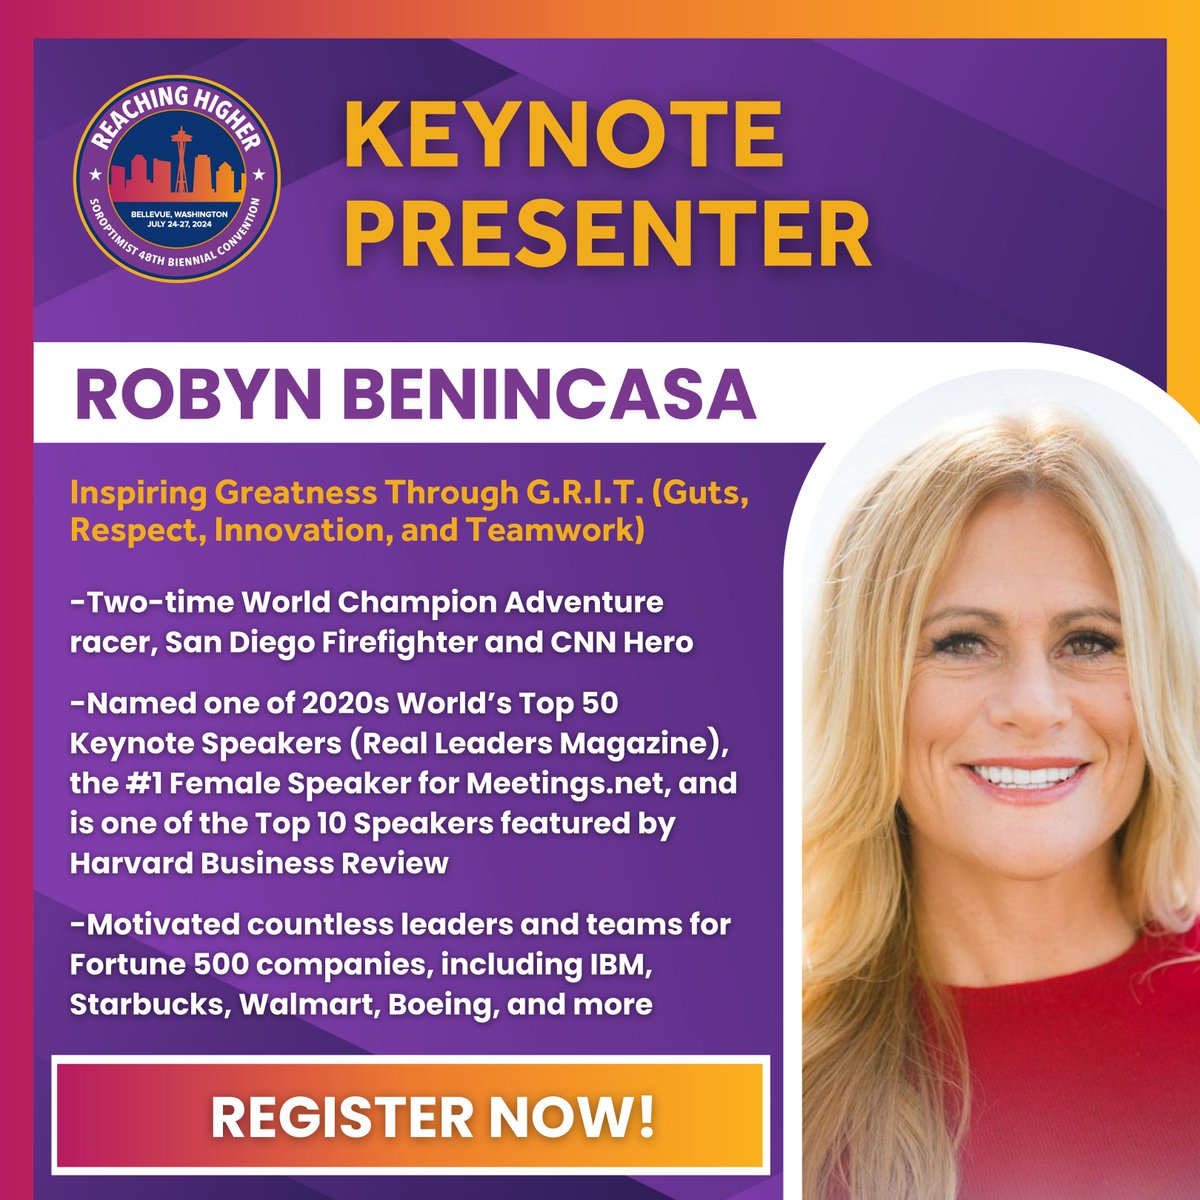 📣 Robyn Benincasa is one of the keynote presenters for the 48th Biennial Convention! Learn more about her session and expertise here: soroptimist.org/siaconv2024 #SIAConv2024